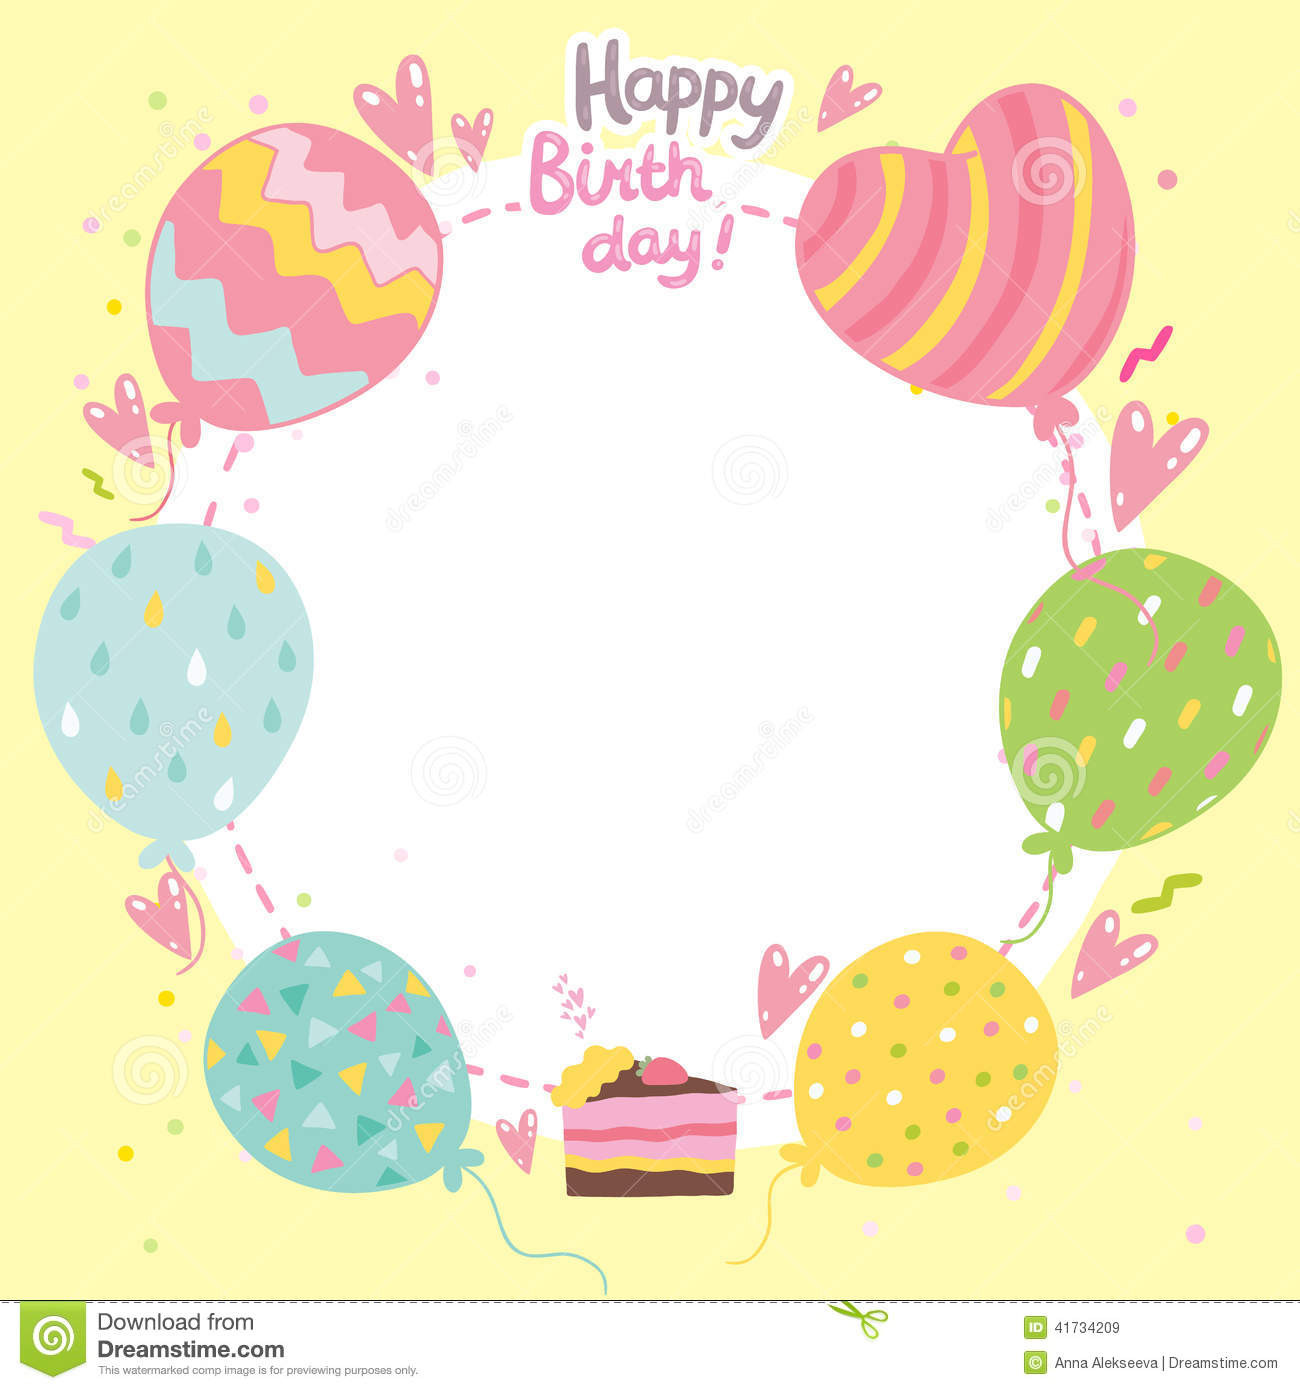 Best ideas about Birthday Card Template Free
. Save or Pin Birthday Card Template Now.